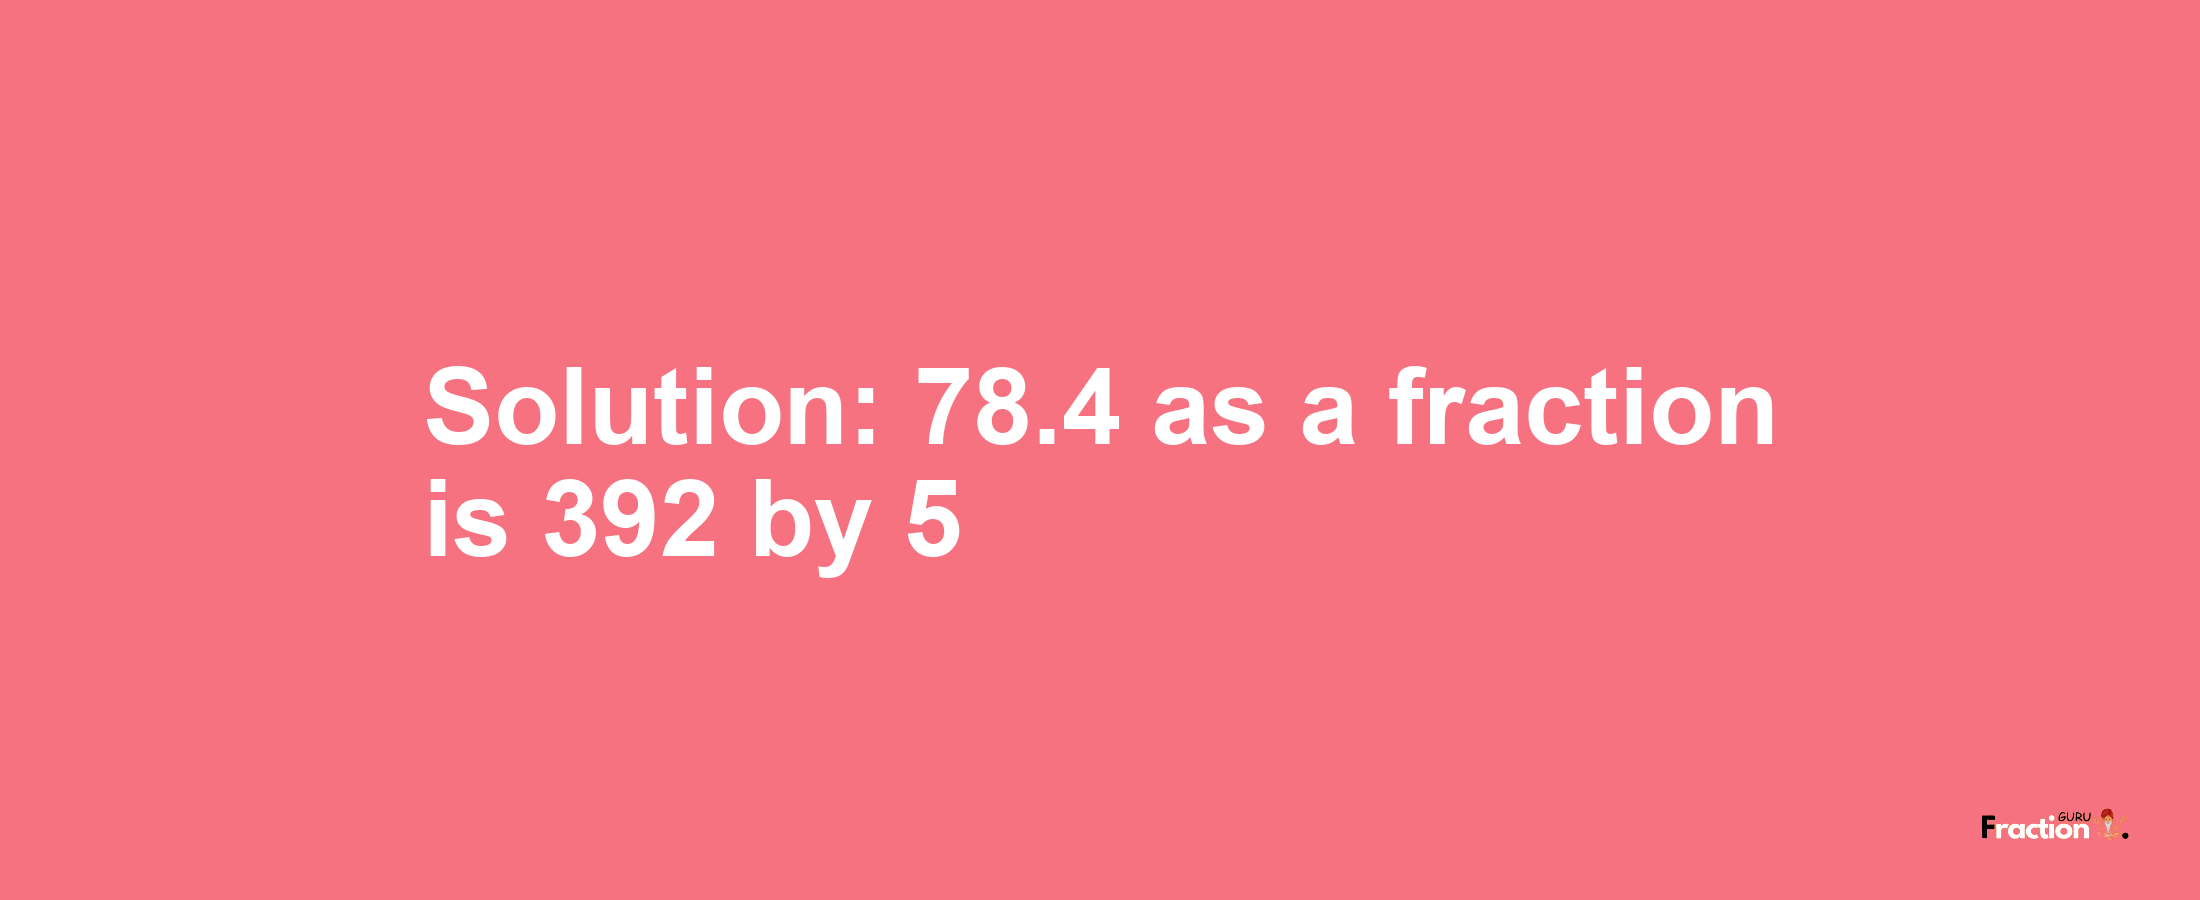 Solution:78.4 as a fraction is 392/5